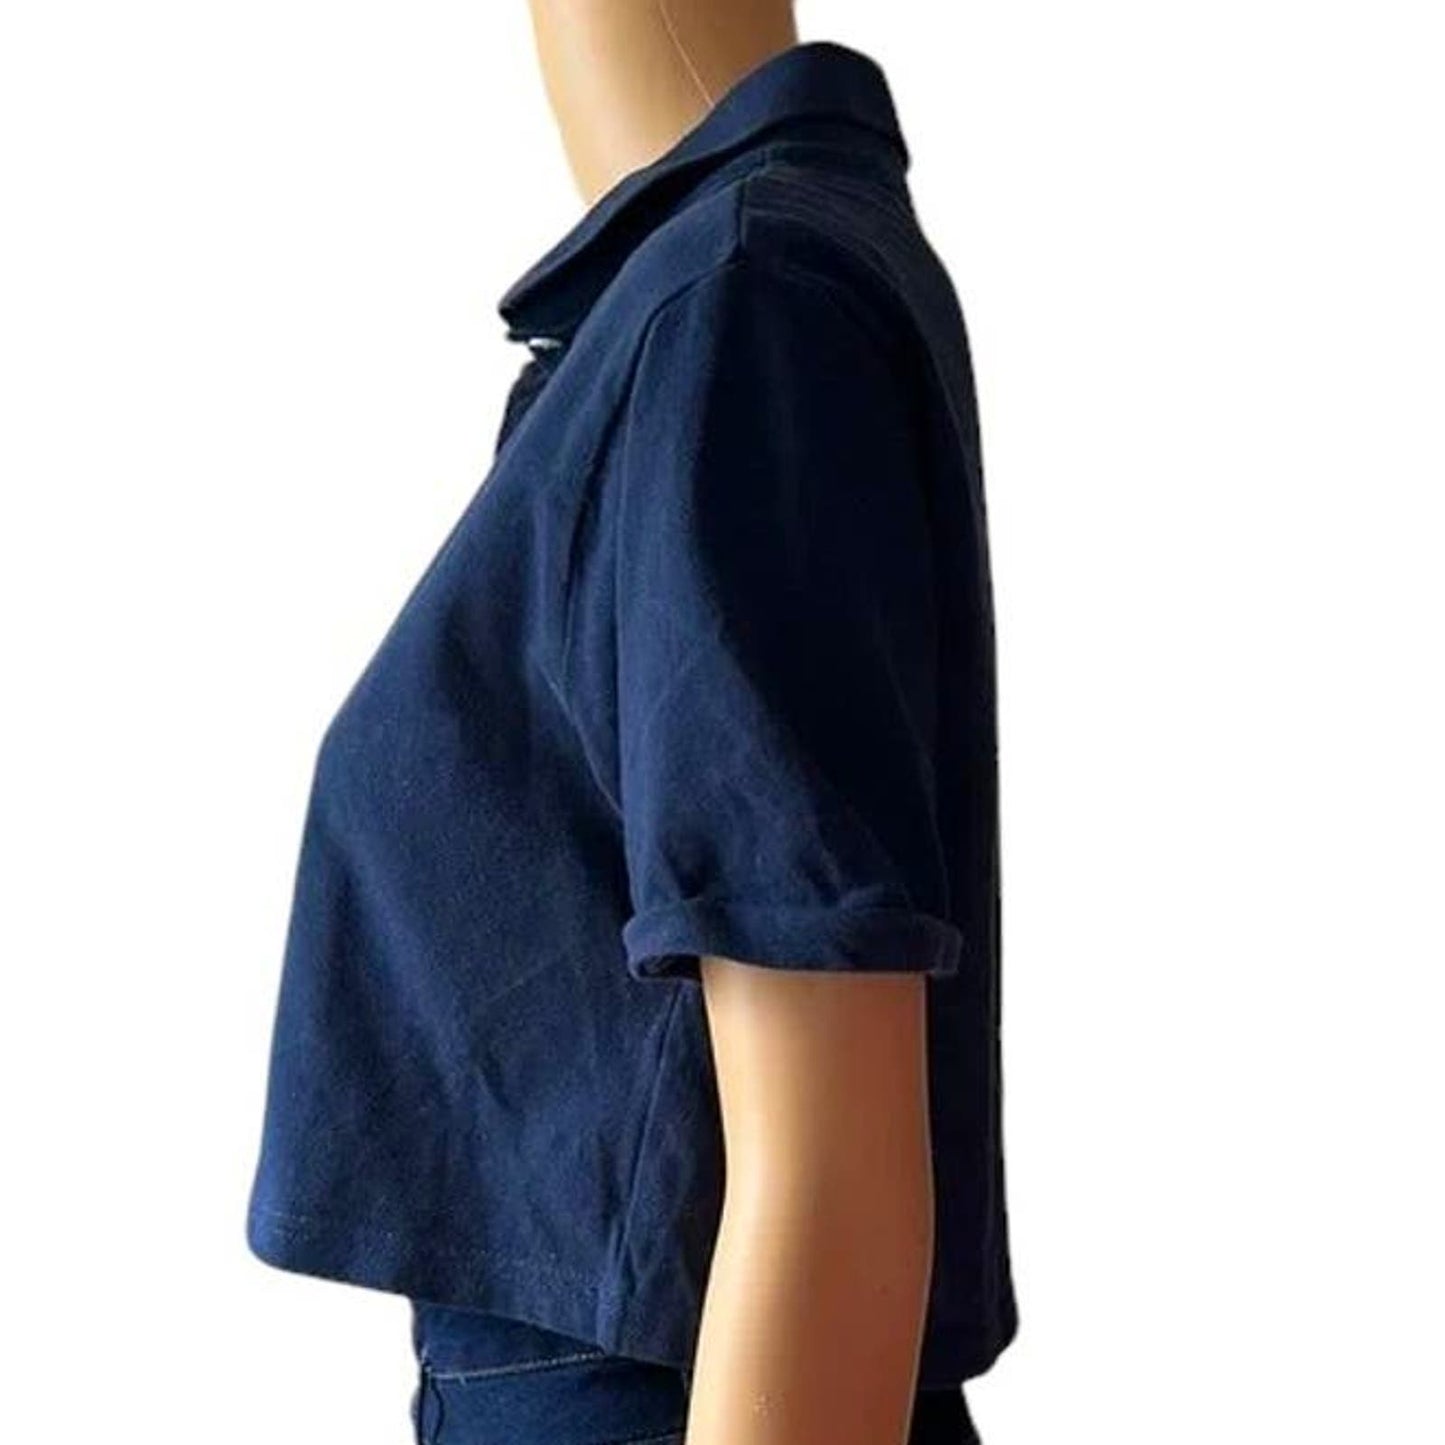 Wild Fable Women's Polo Style Cropped Top, 3-Button Shirt, Navy Blue, XX-Large